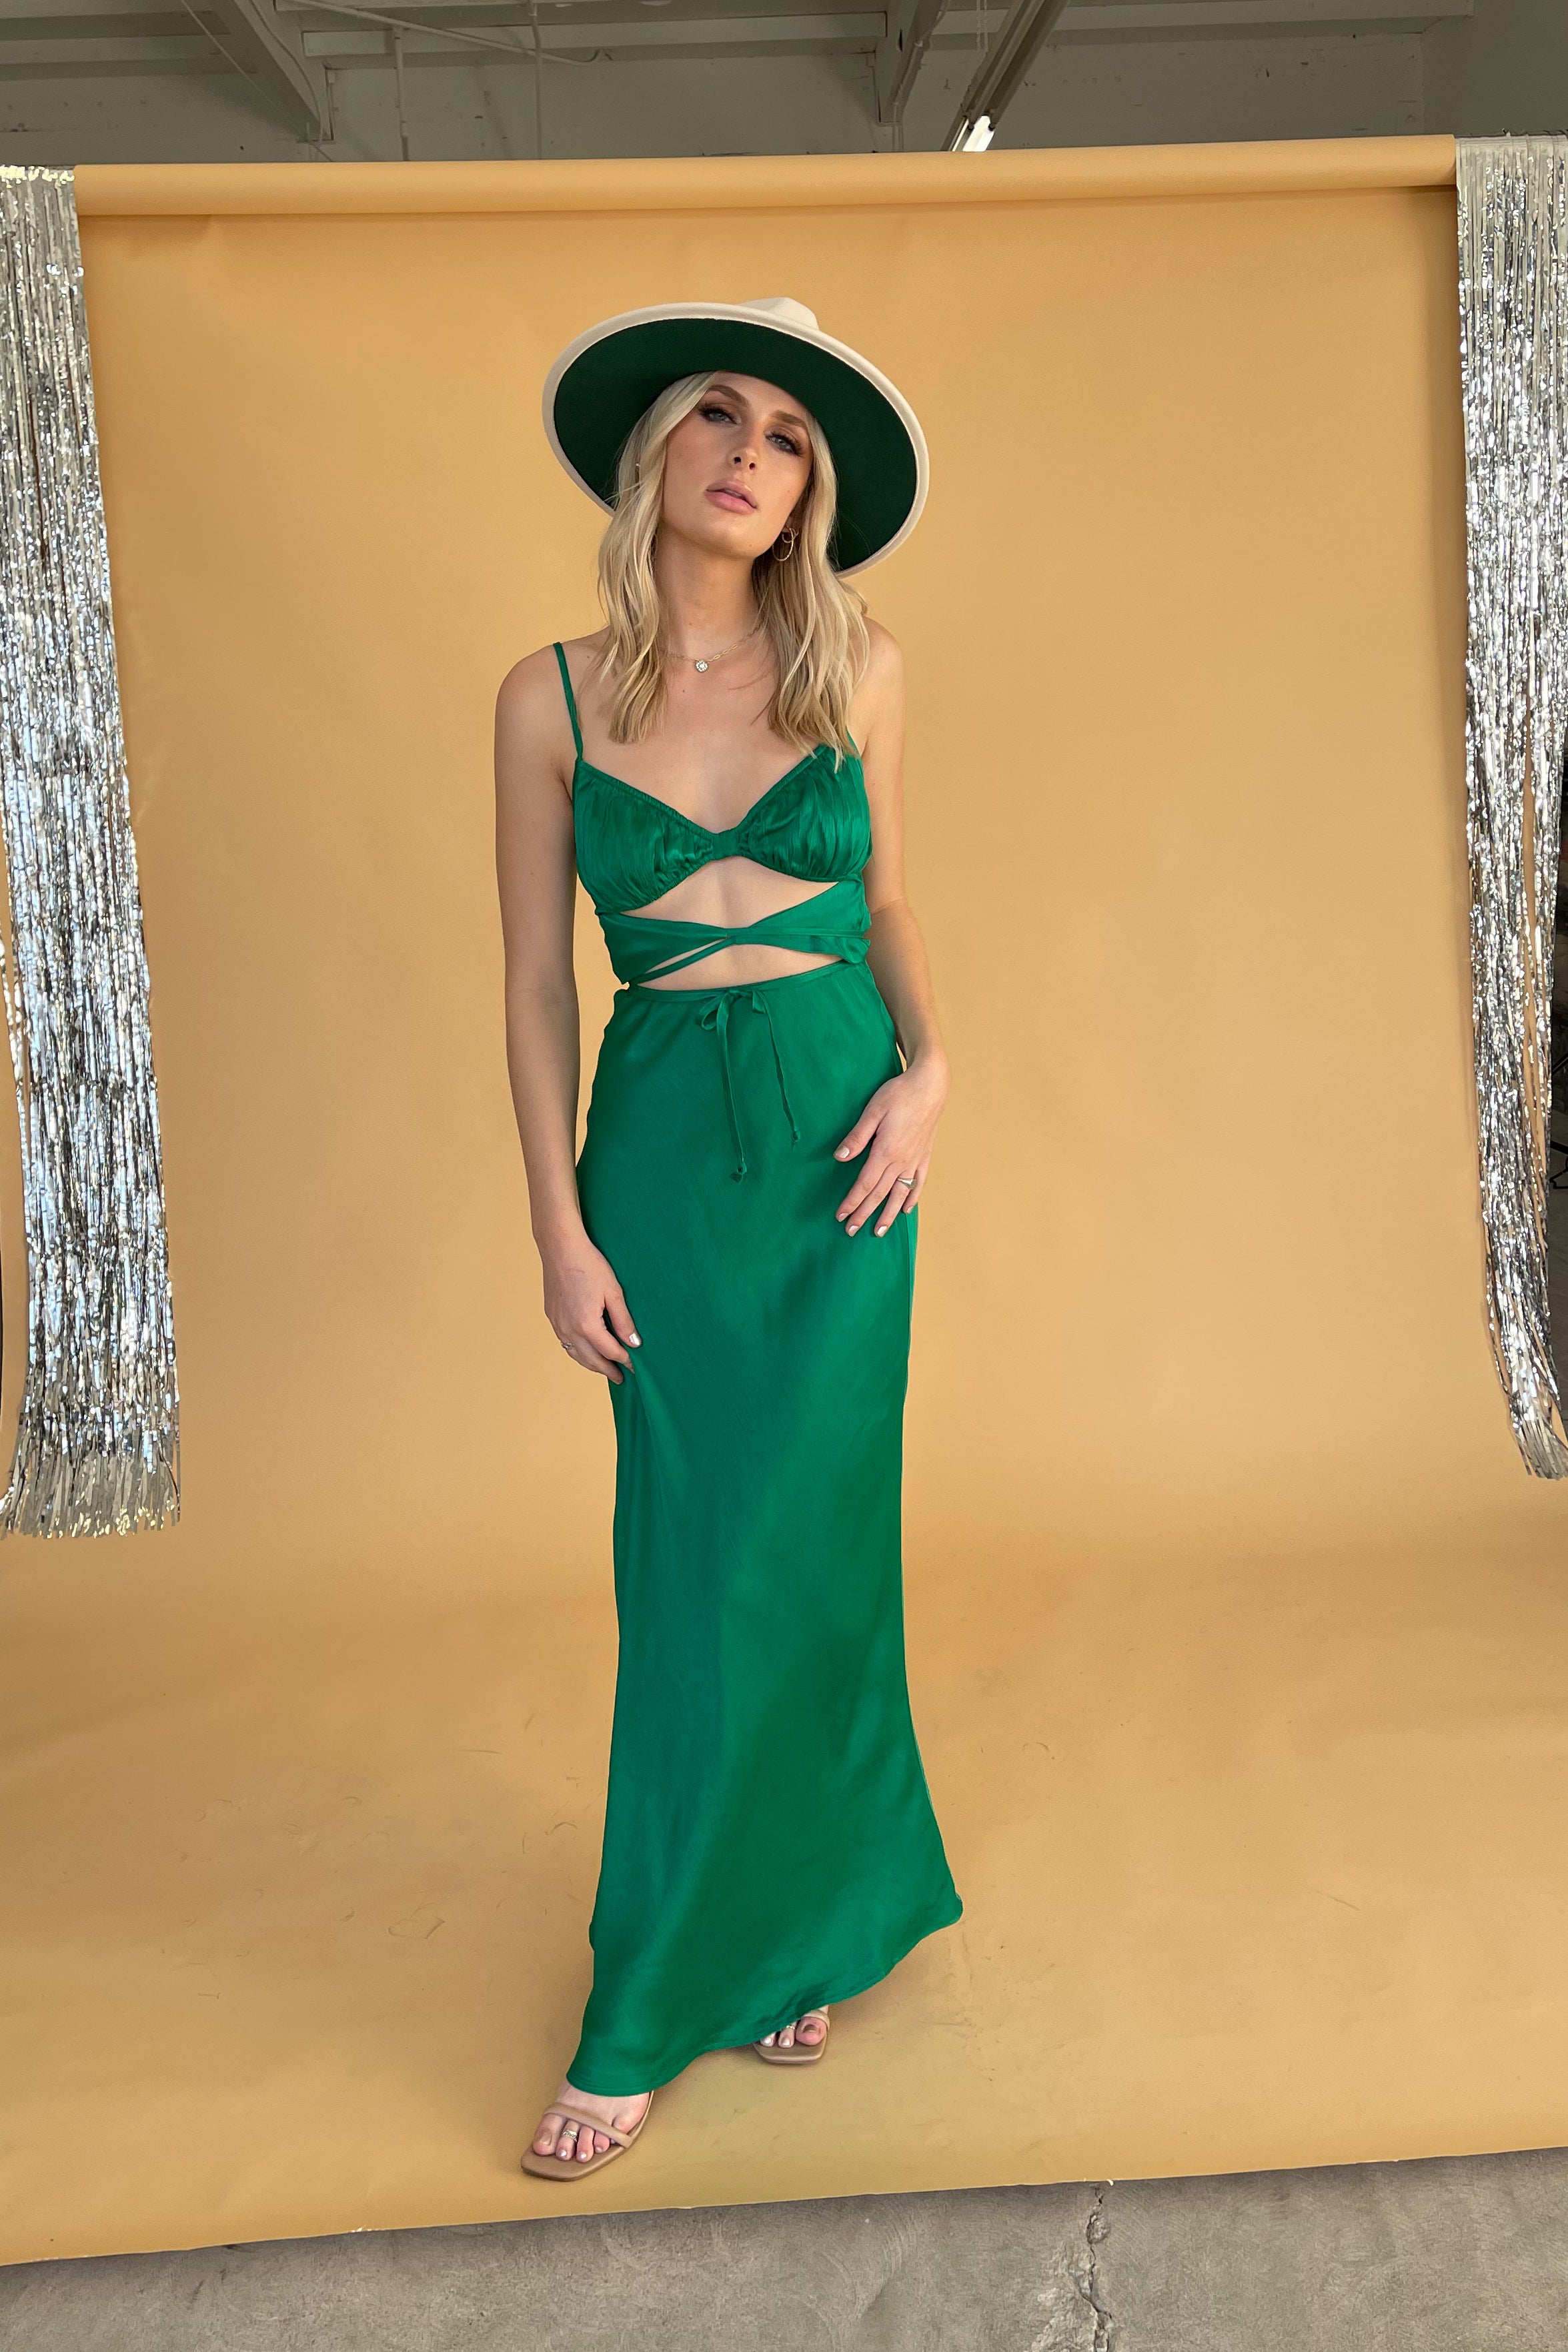 All Eyes On You Maxi Dress-Wild Jungle